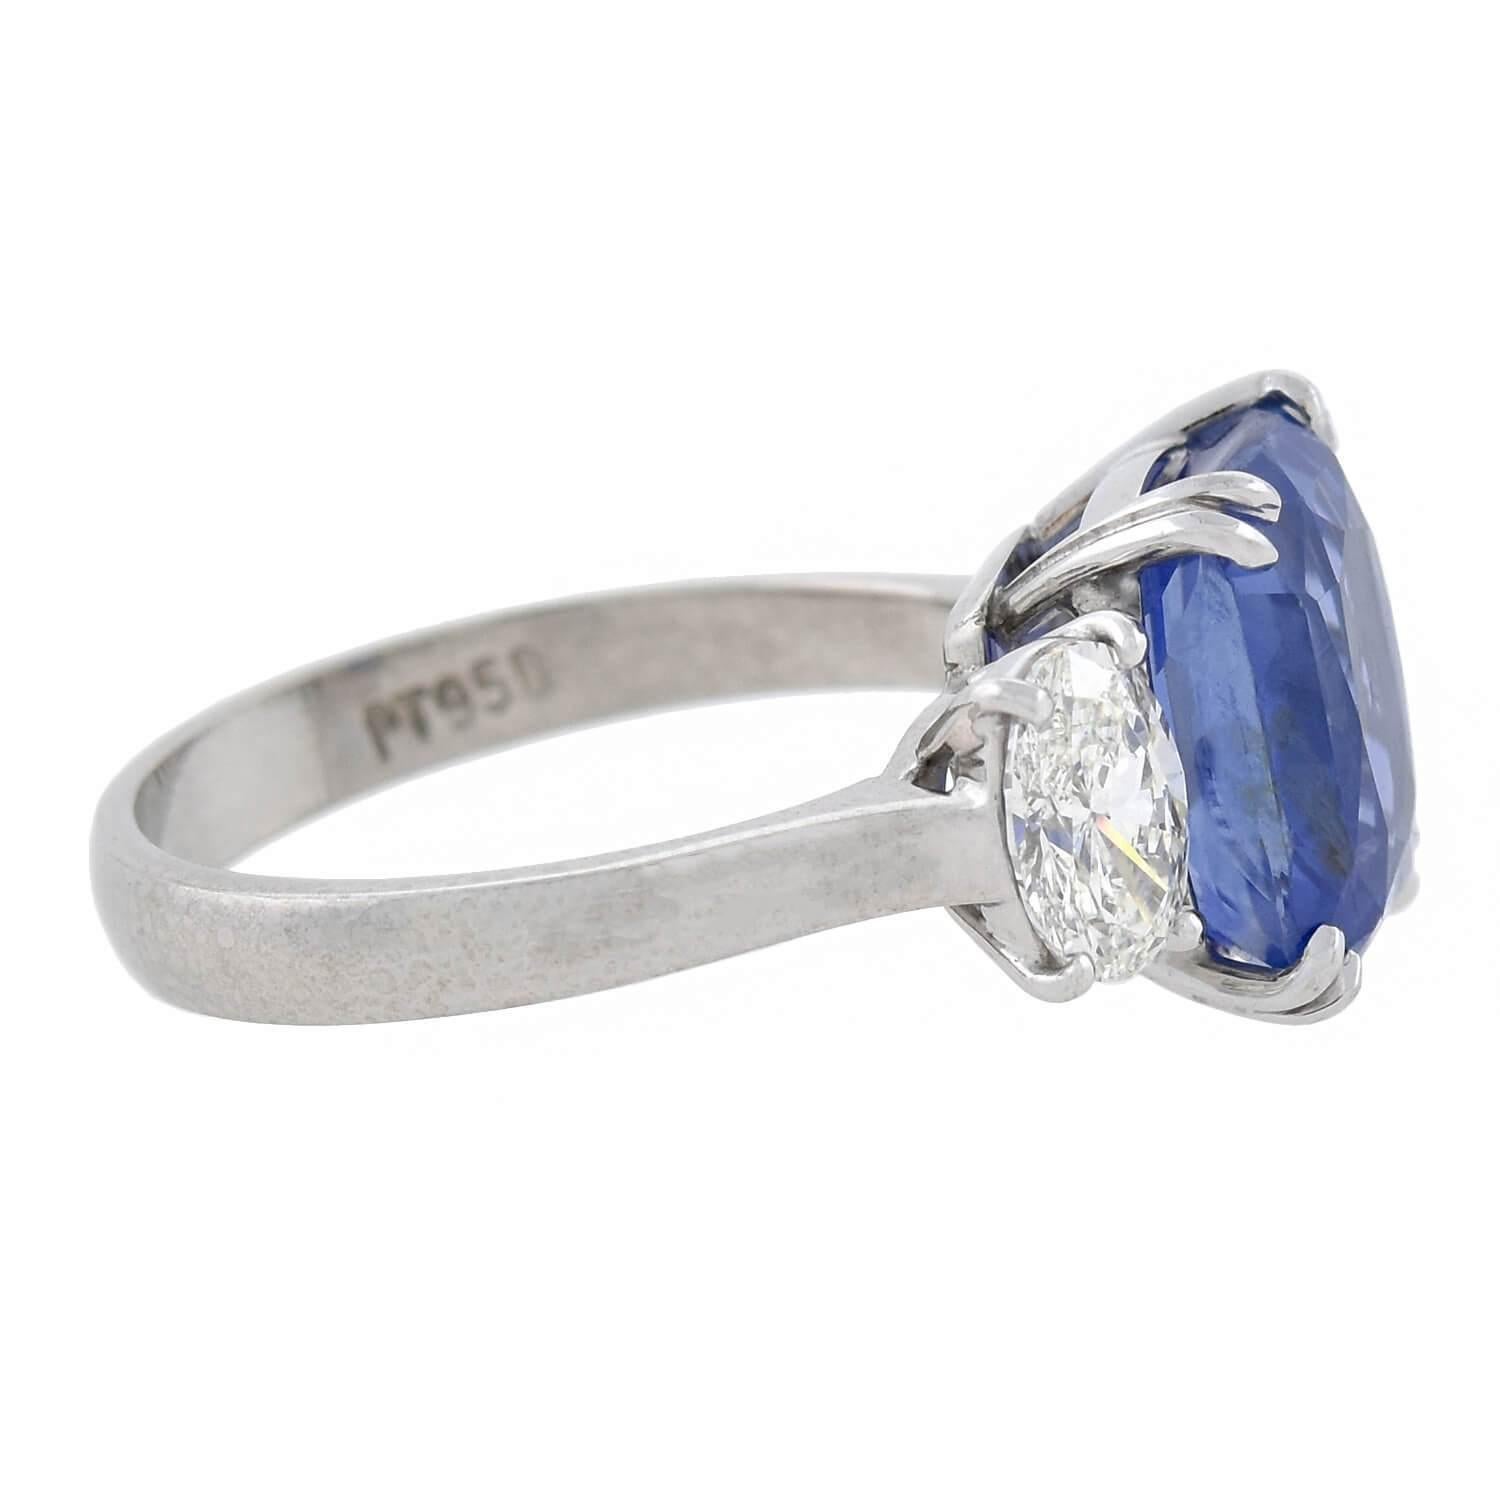 An exquisite contemporary sapphire and diamond ring! Crafted of platinum, this stunning piece holds a gorgeous natural sapphire at the center, framed by sparkling diamonds at either shoulder. The Ceylon (Sri Lankan) sapphire has an exact weight of